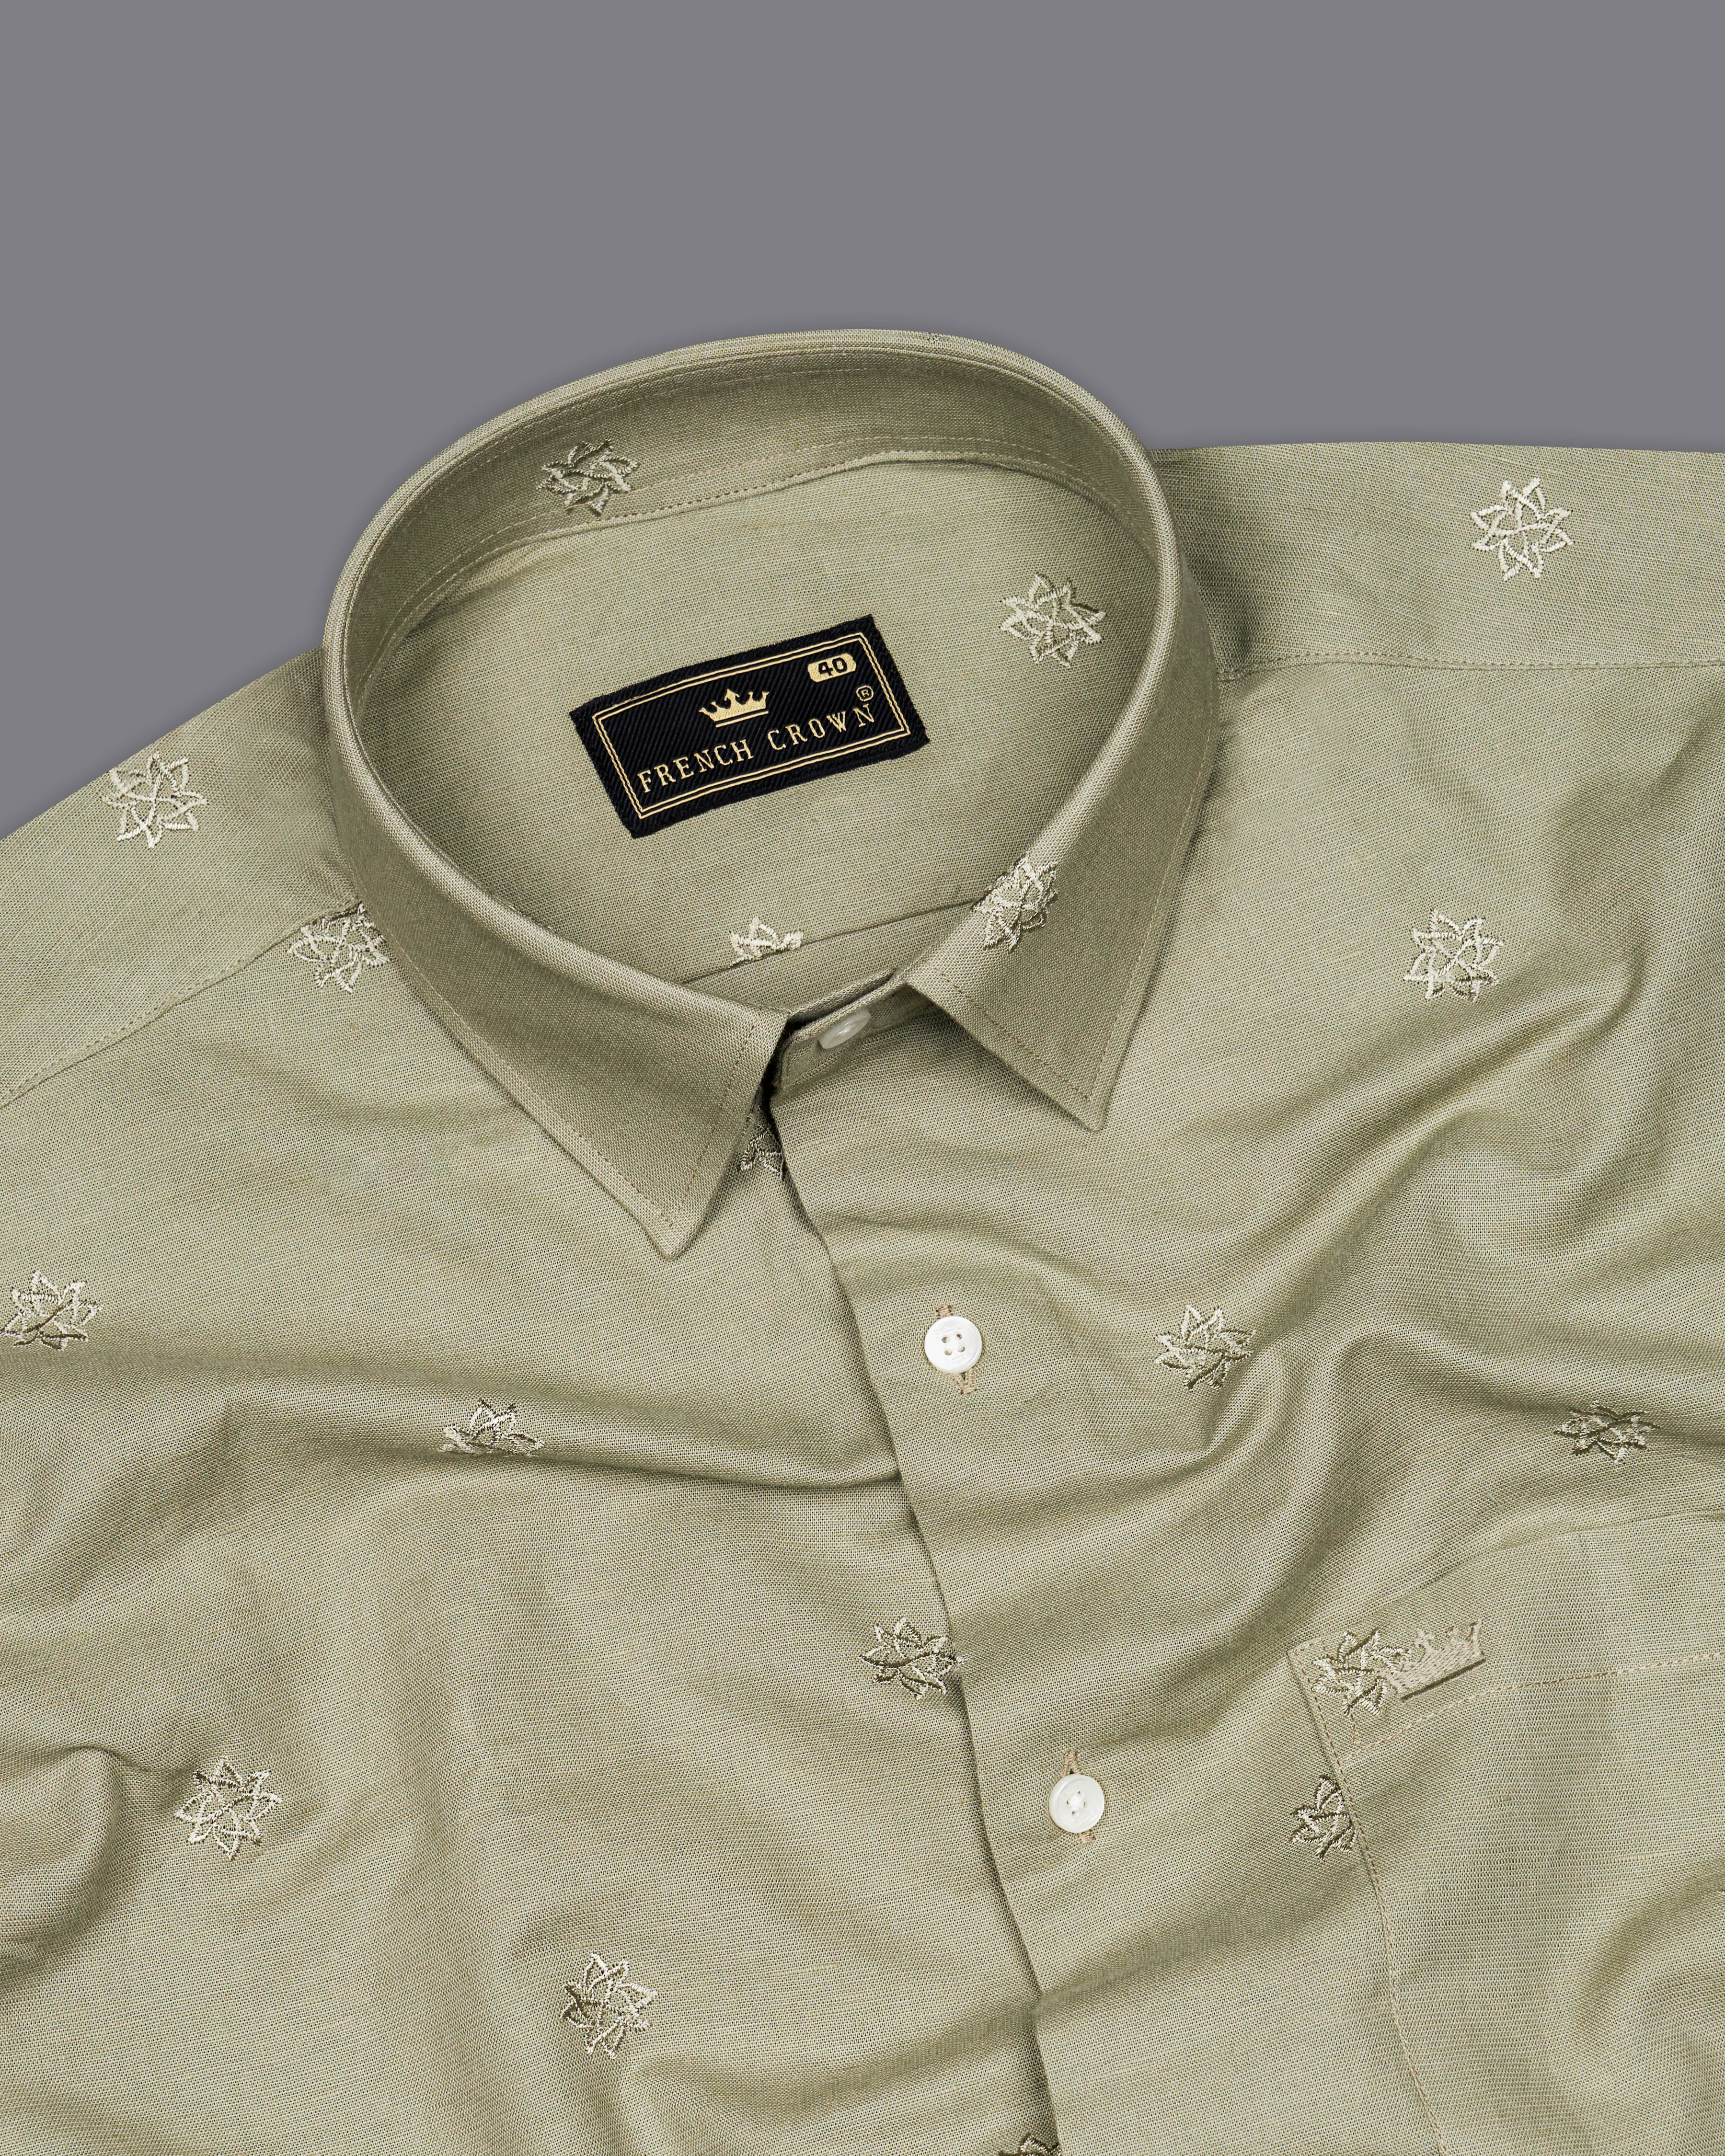 Taupe Green Embroidered Luxurious Linen Shirt 9727-38, 9727-H-38, 9727-39, 9727-H-39, 9727-40, 9727-H-40, 9727-42, 9727-H-42, 9727-44, 9727-H-44, 9727-46, 9727-H-46, 9727-48, 9727-H-48, 9727-50, 9727-H-50, 9727-52, 9727-H-52